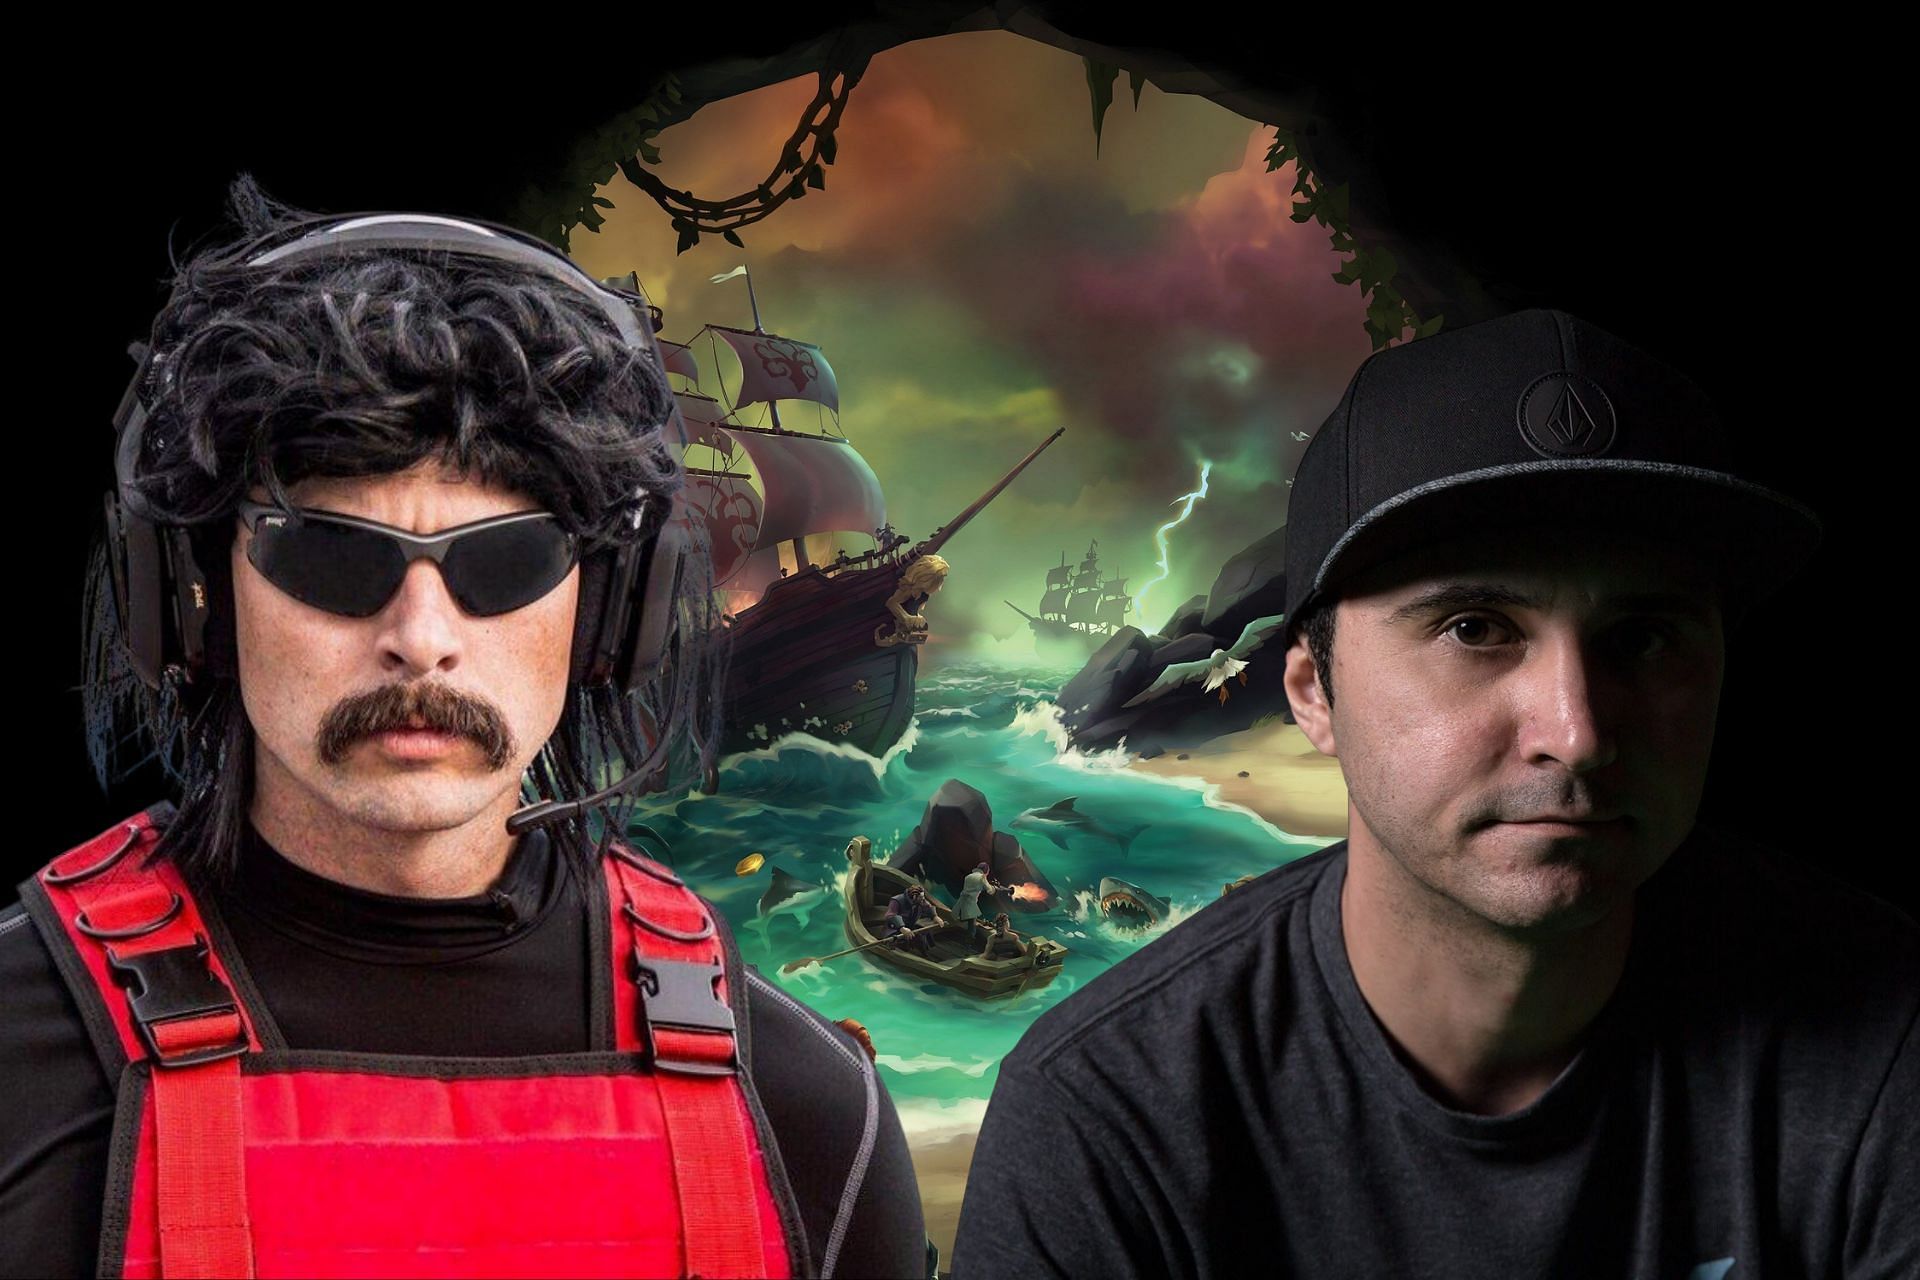 Summit1G remarked recently about genuinely missing Dr Disrespect on Twitch (Image via Sportskeeda)